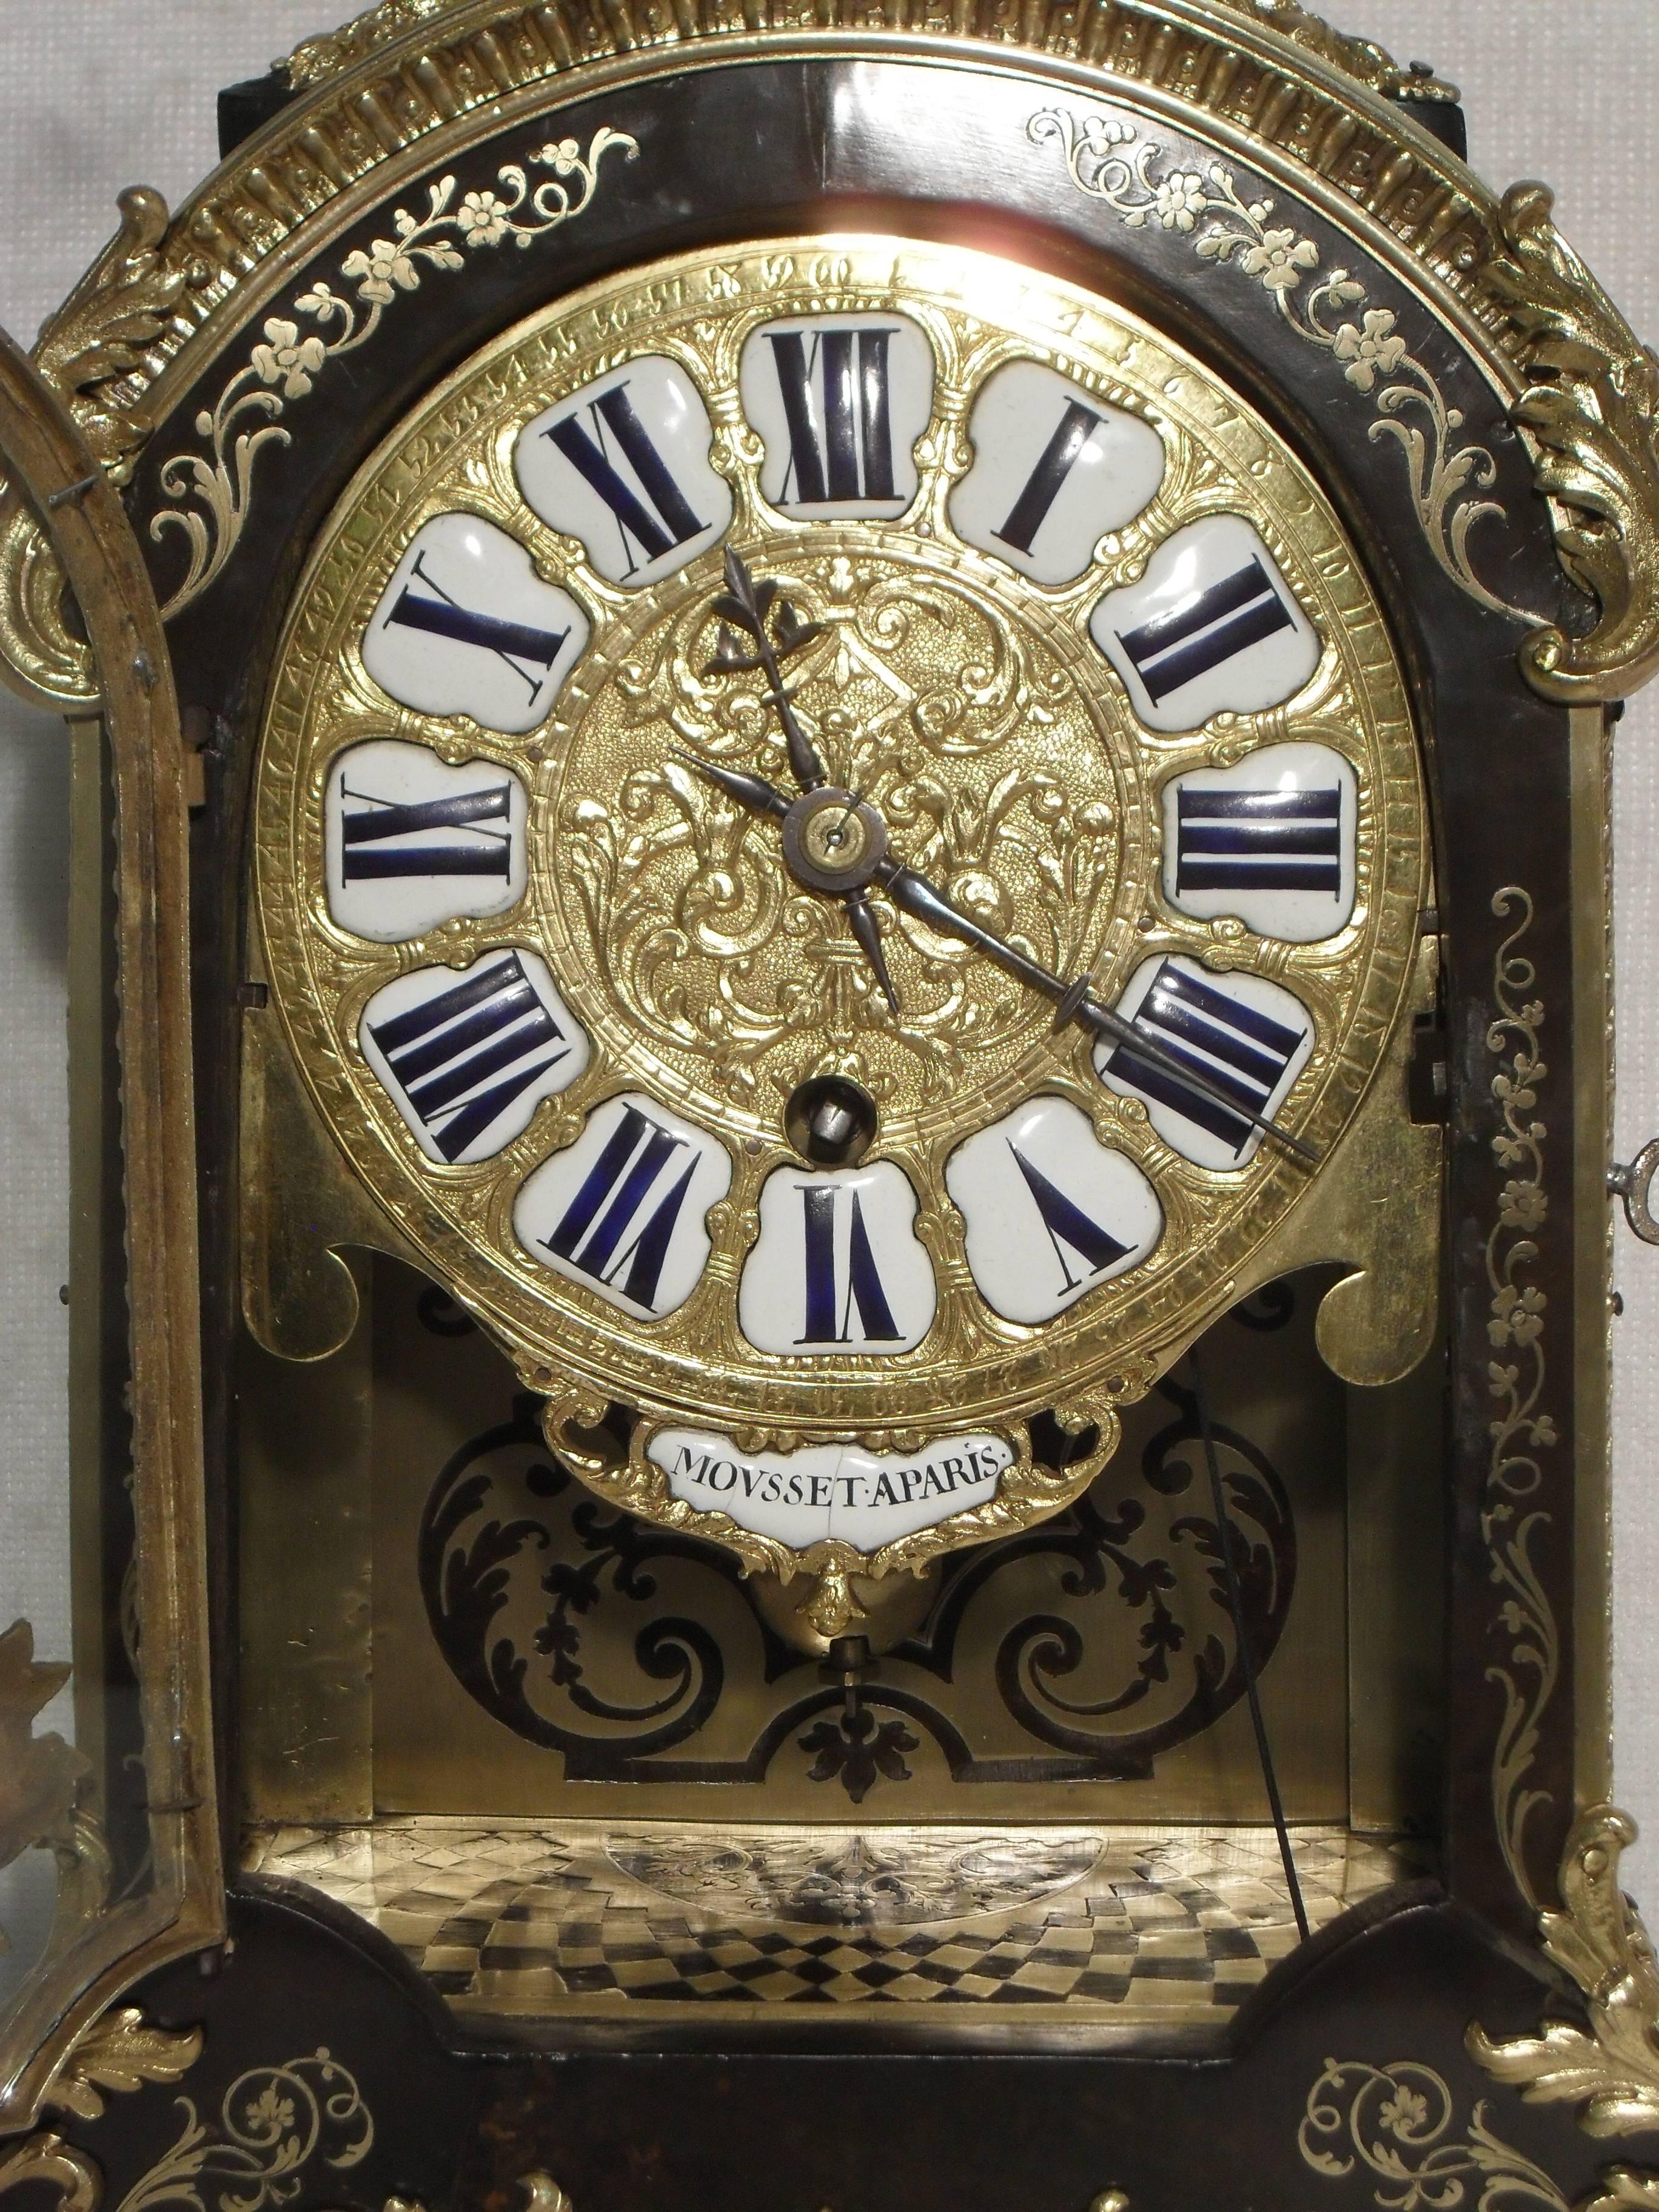 An extremely fine quality and rare Louis XV boulle engraved brass and natural coloured tortoise shell bracket clock with gilt brass mounts, cupid finial and a pair of birds to the door stood on scroll feet with side viewing windows.

The clock has